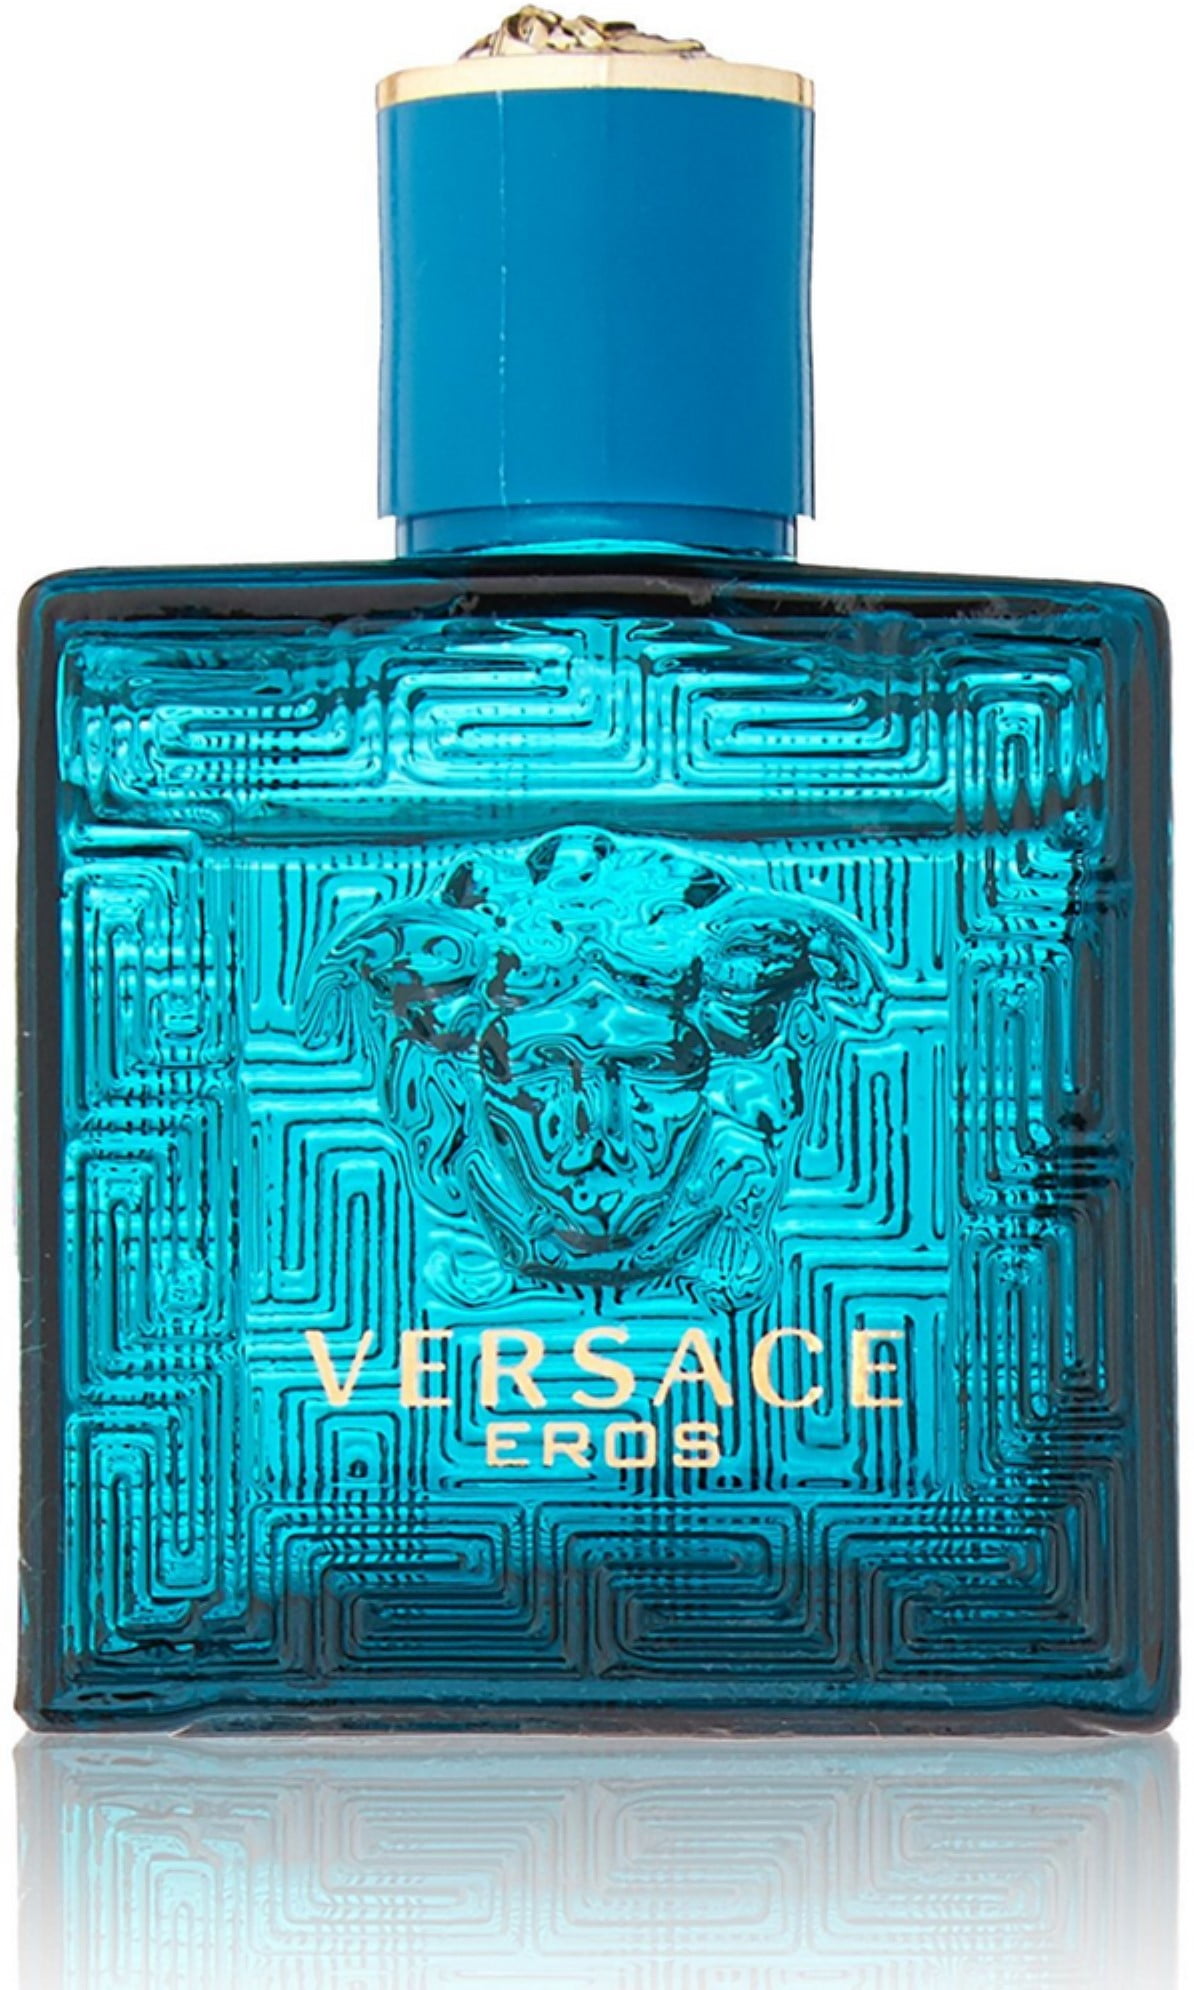 versace cologne small